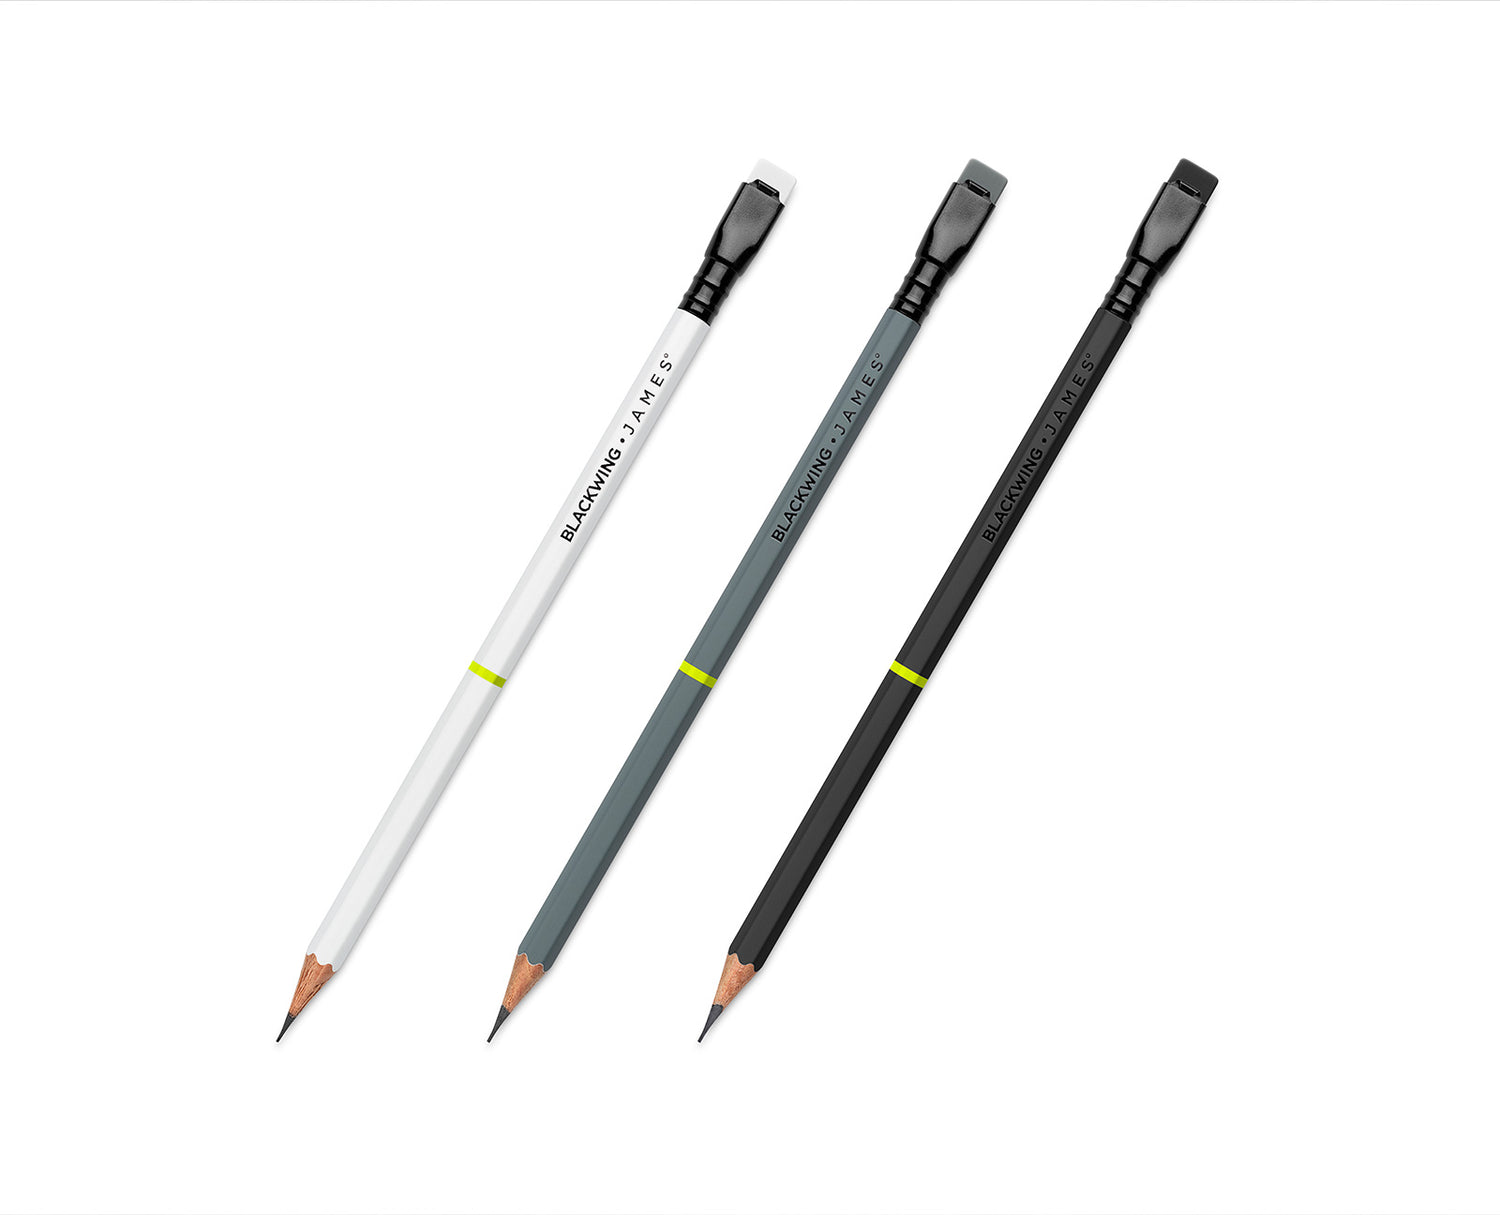 James x Blackwing - EDC Pearl Graphite Pencil 12 Pack – The James